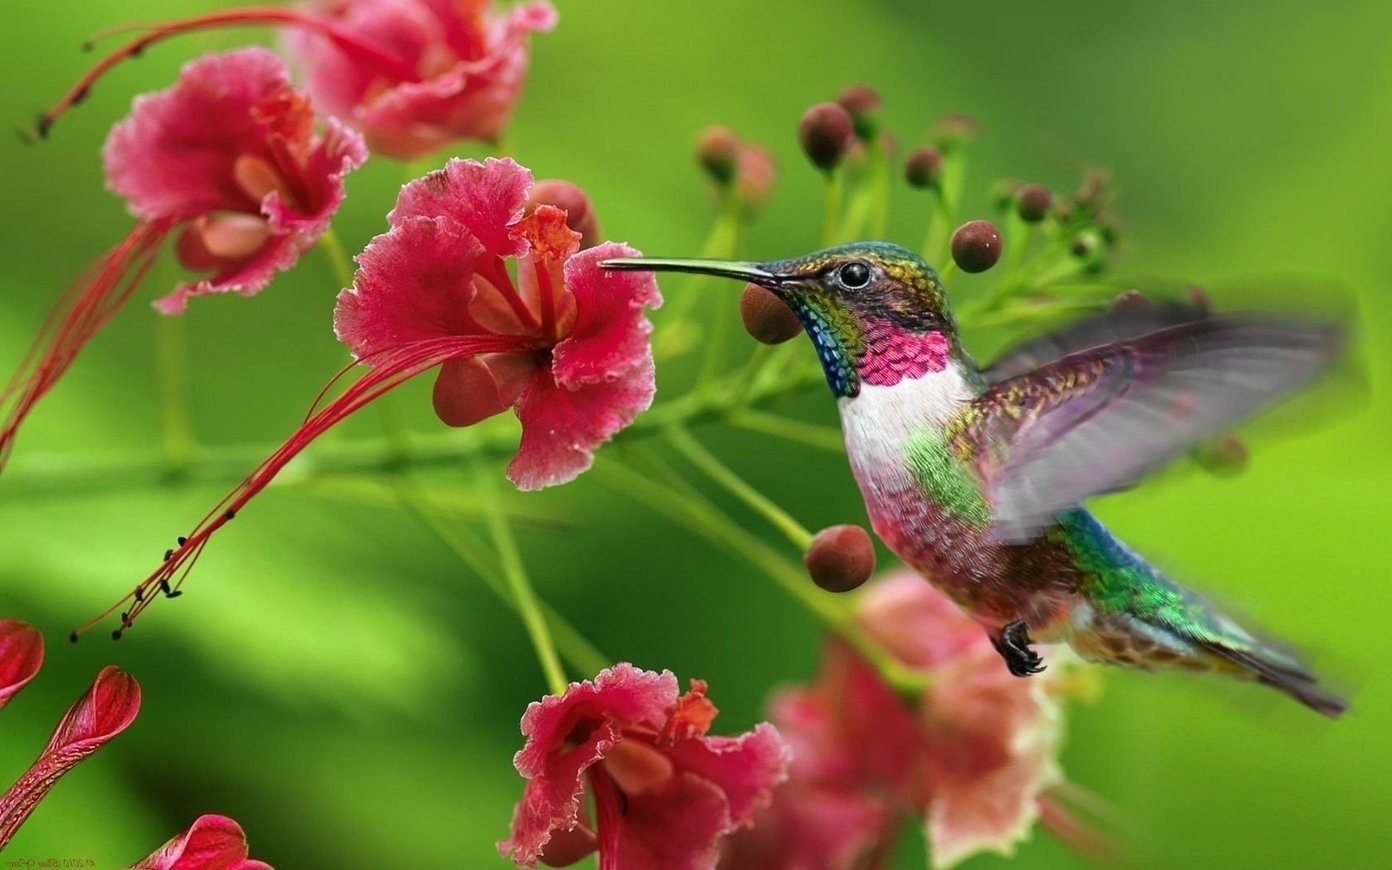 Beautiful HD and 4K Wallpaper of Exotic Birds That You Should Download